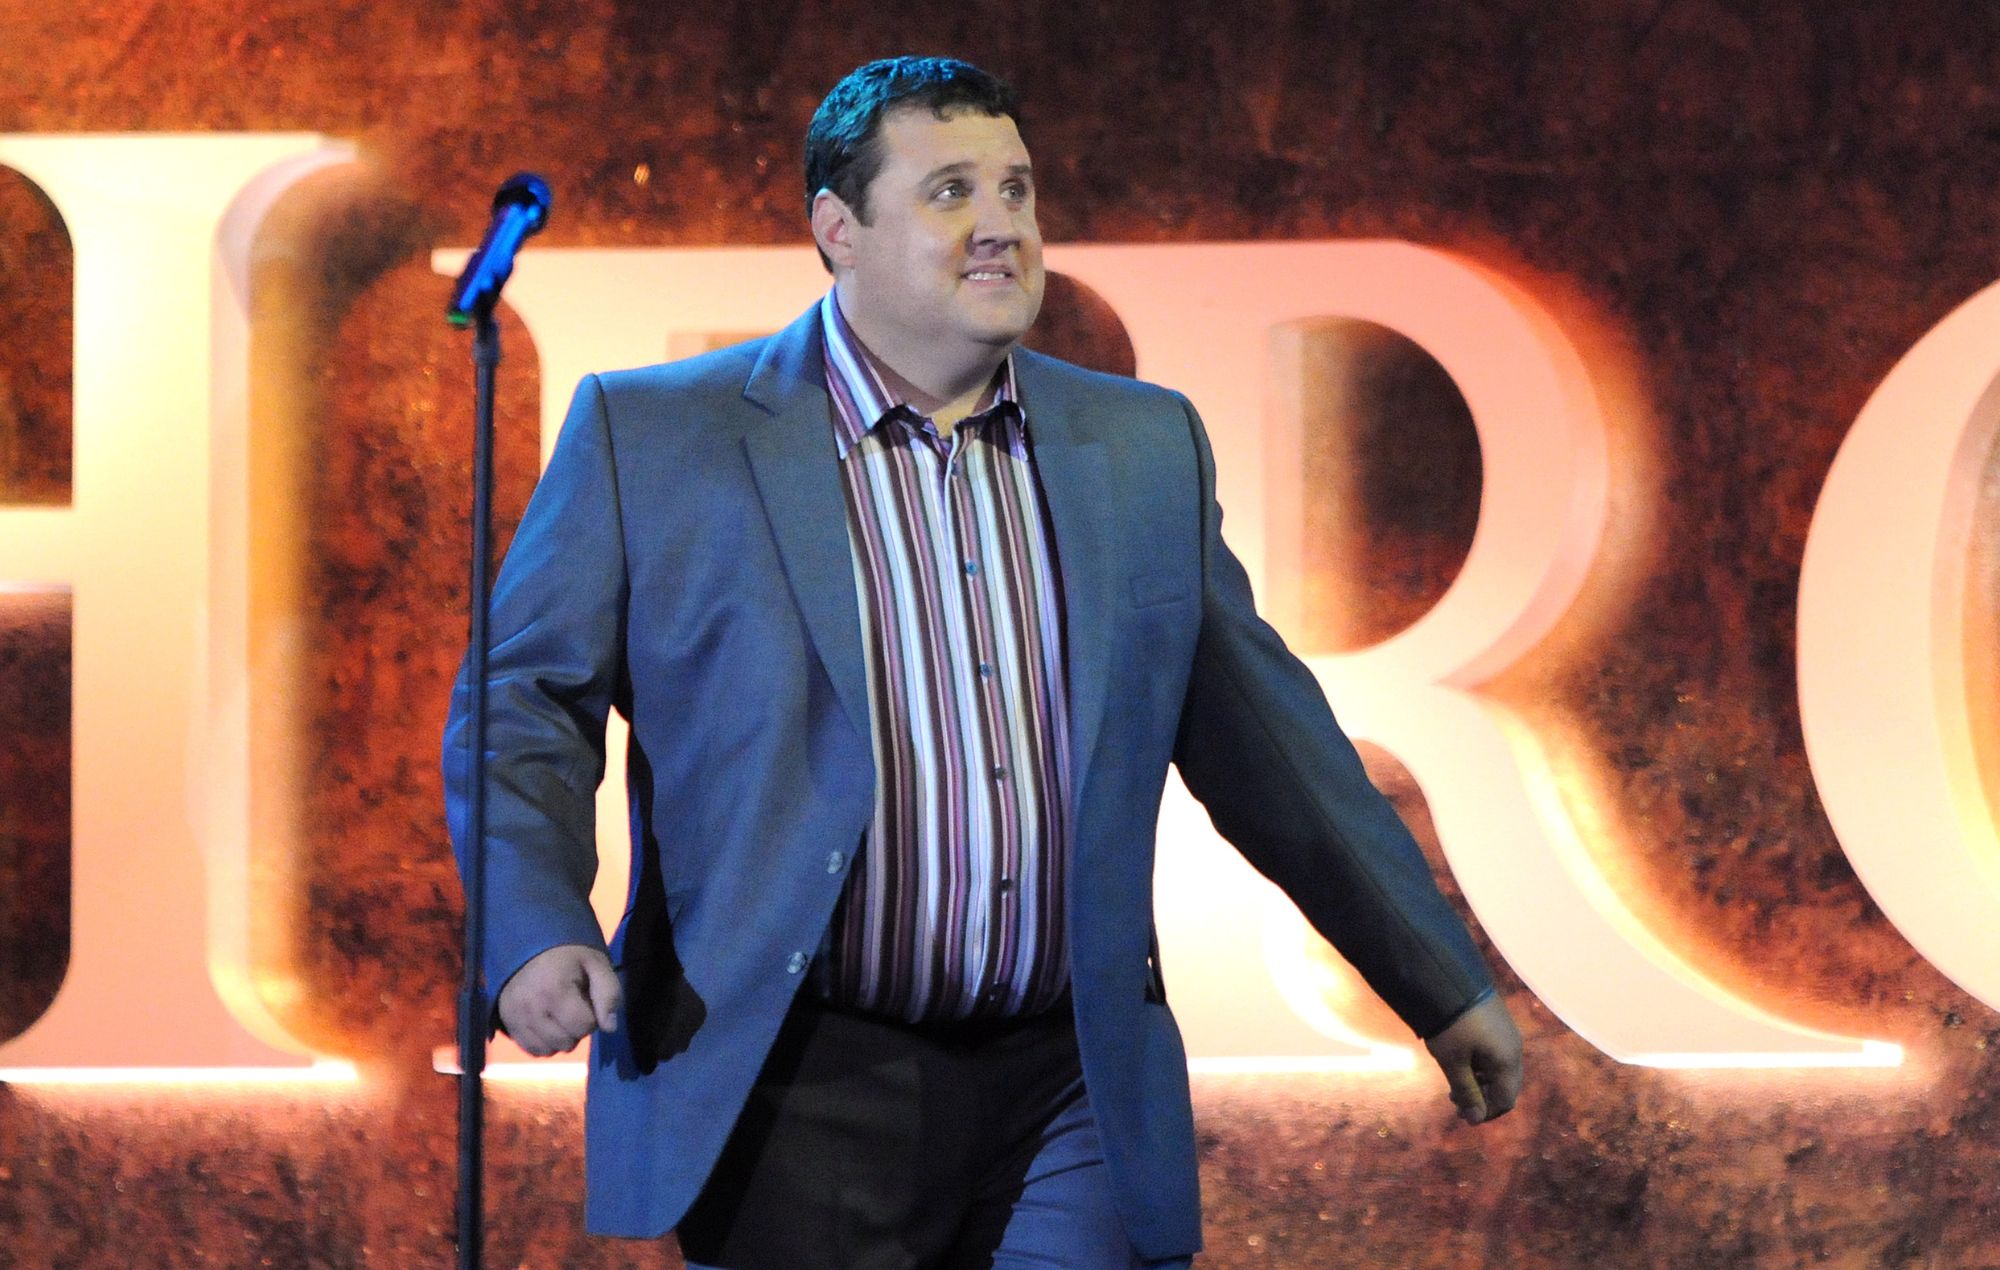 Comedian Peter Kay performs live on stage during the Heroes Concert at Twickenham Stadium, in aid of the charity Help For Heroes, on September 12, 2010 in London, England.